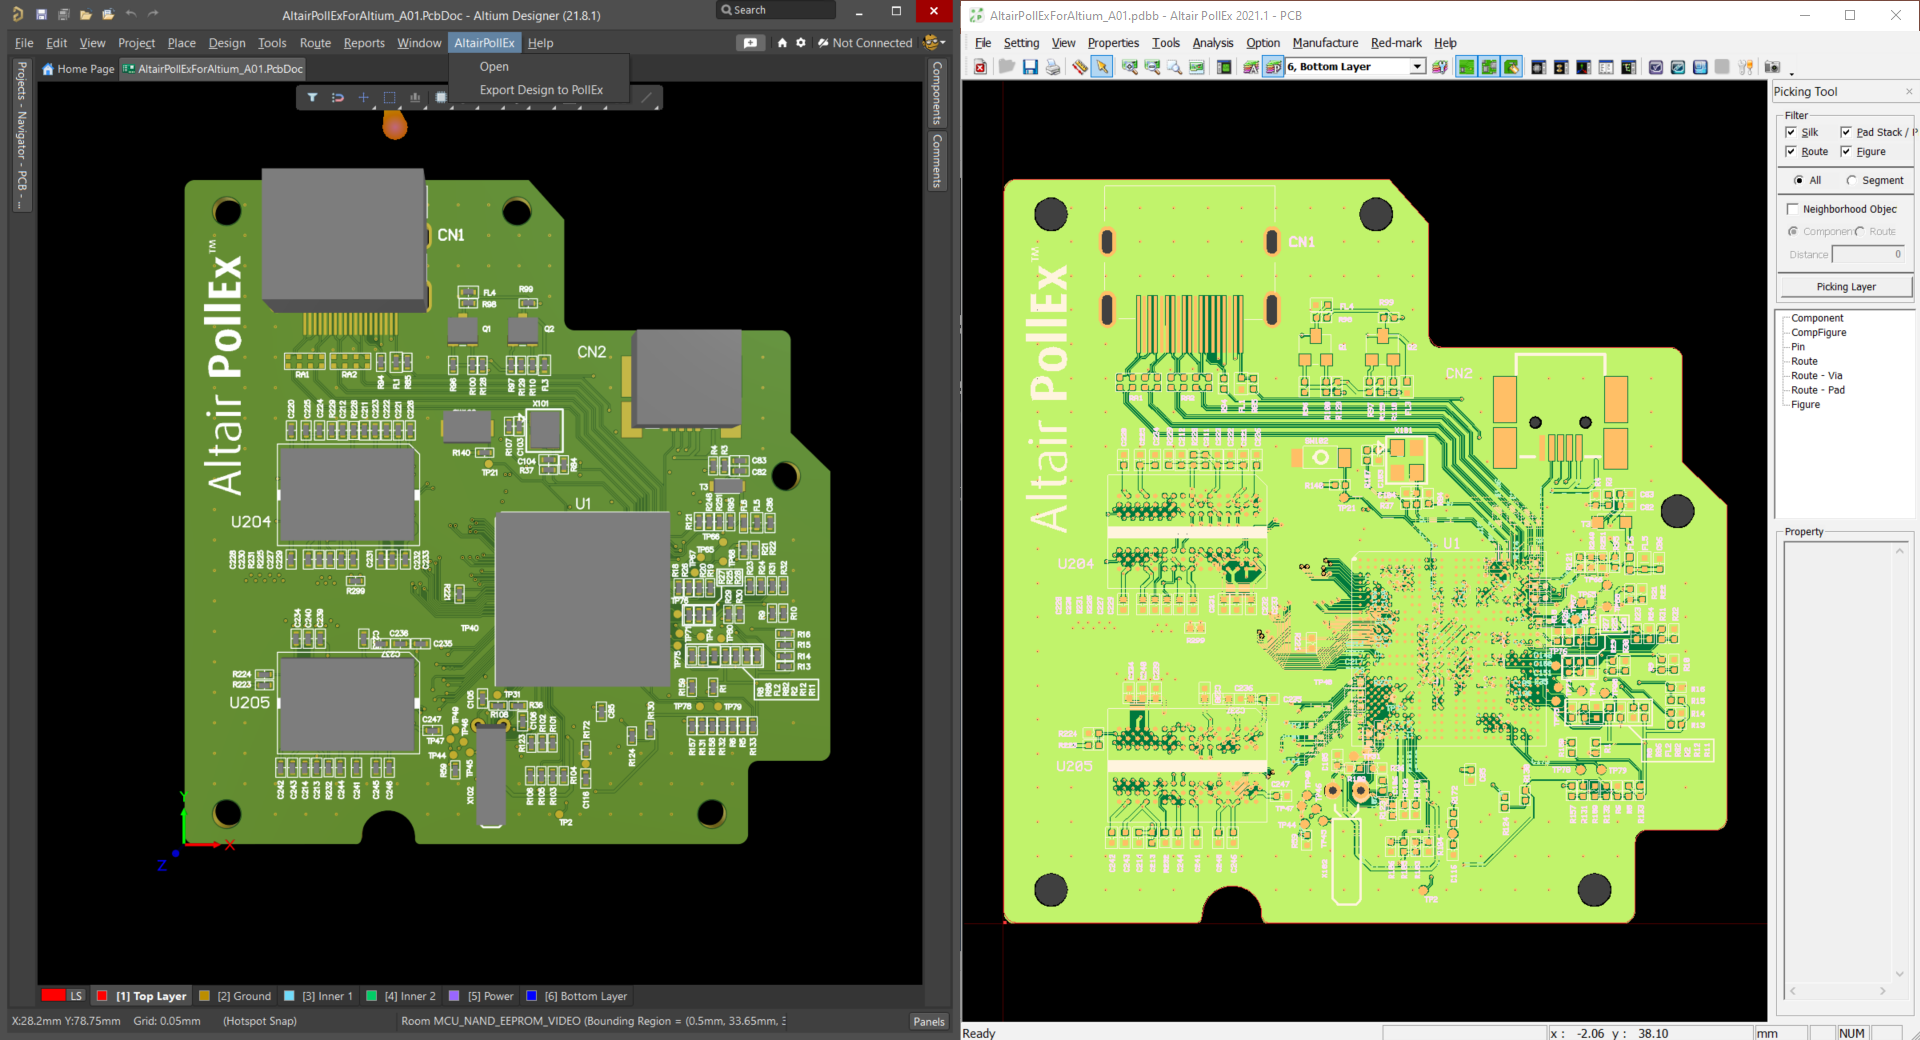 Altair PollEx enables PCB verification with the most popular ECAD programs, including Altium Designer, shown here in combination with the free tool Altair PollEx for Altium.   